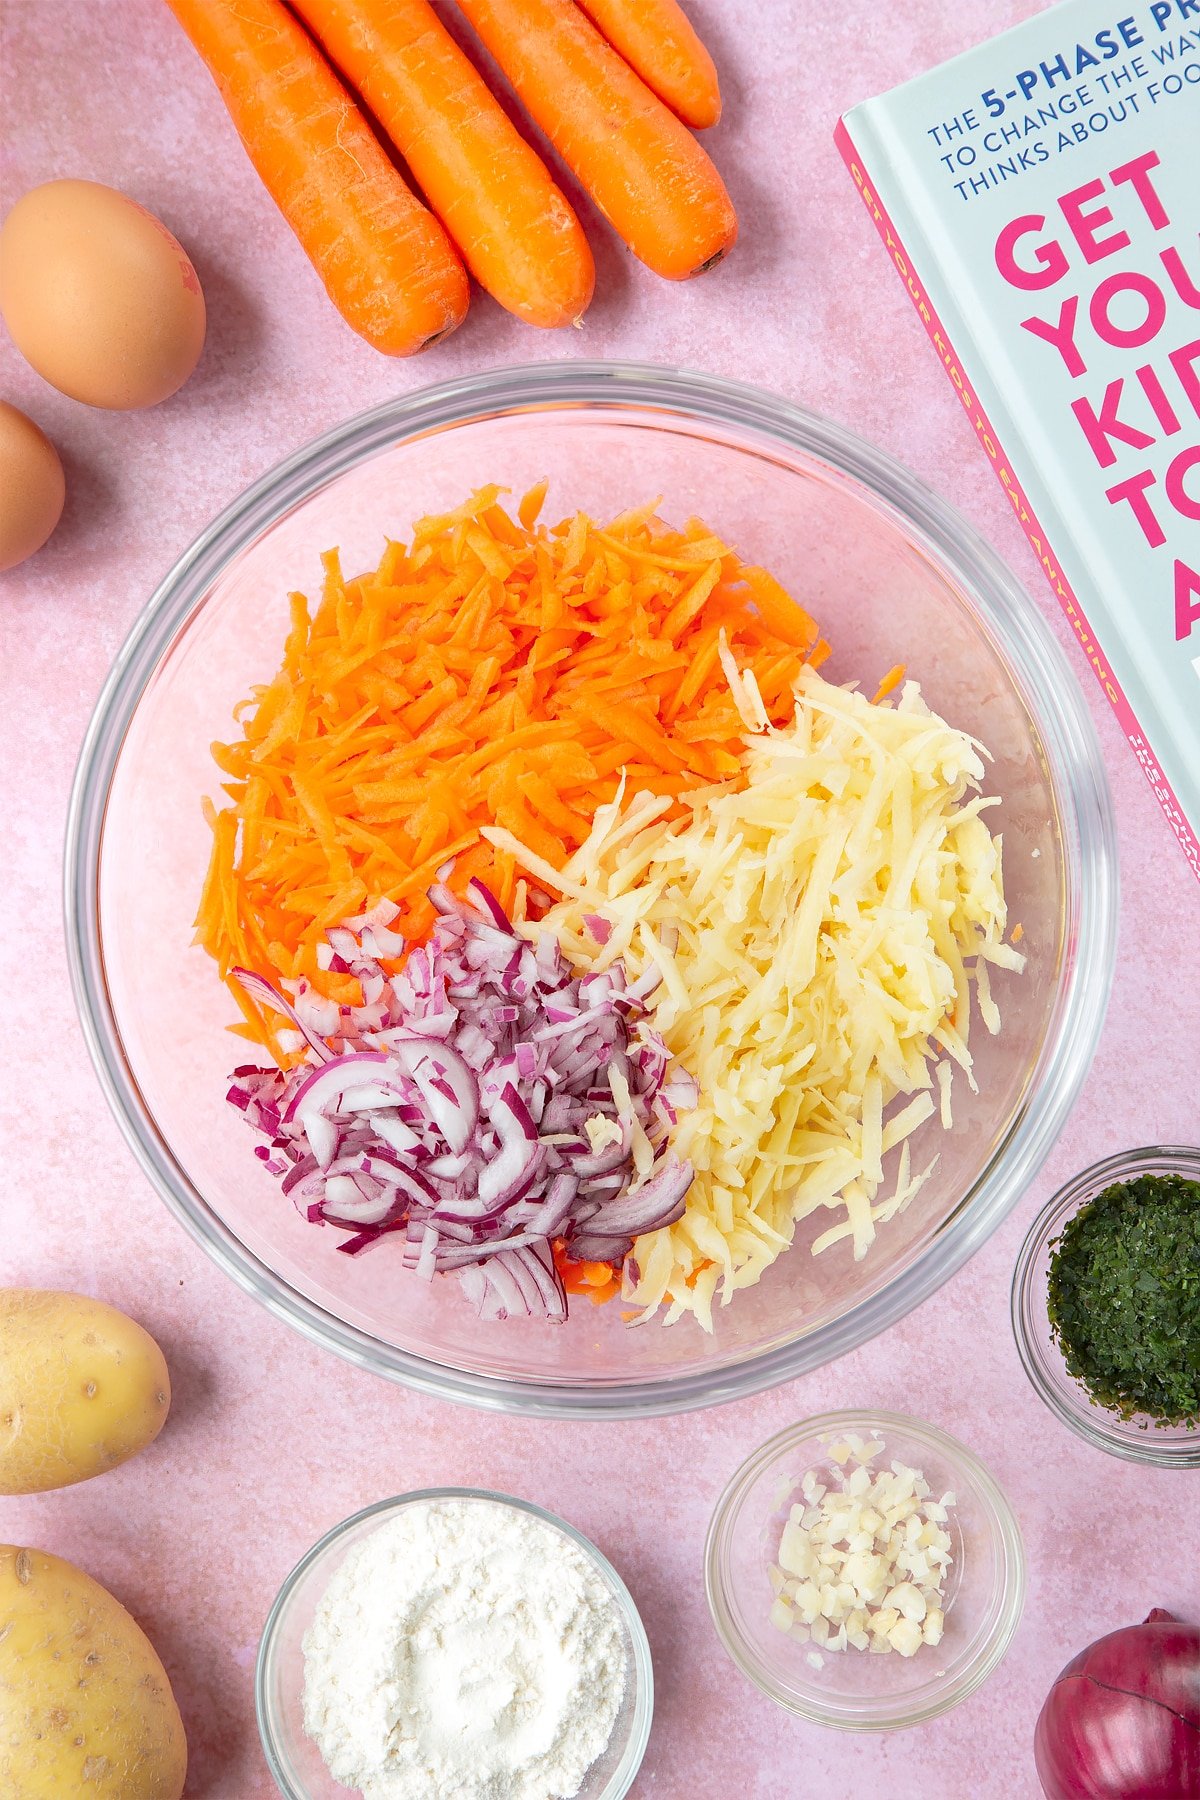 Grated carrot, red onion and potato in a mixing bowl. The bowl is surrounded by ingredients to make carrot patties.